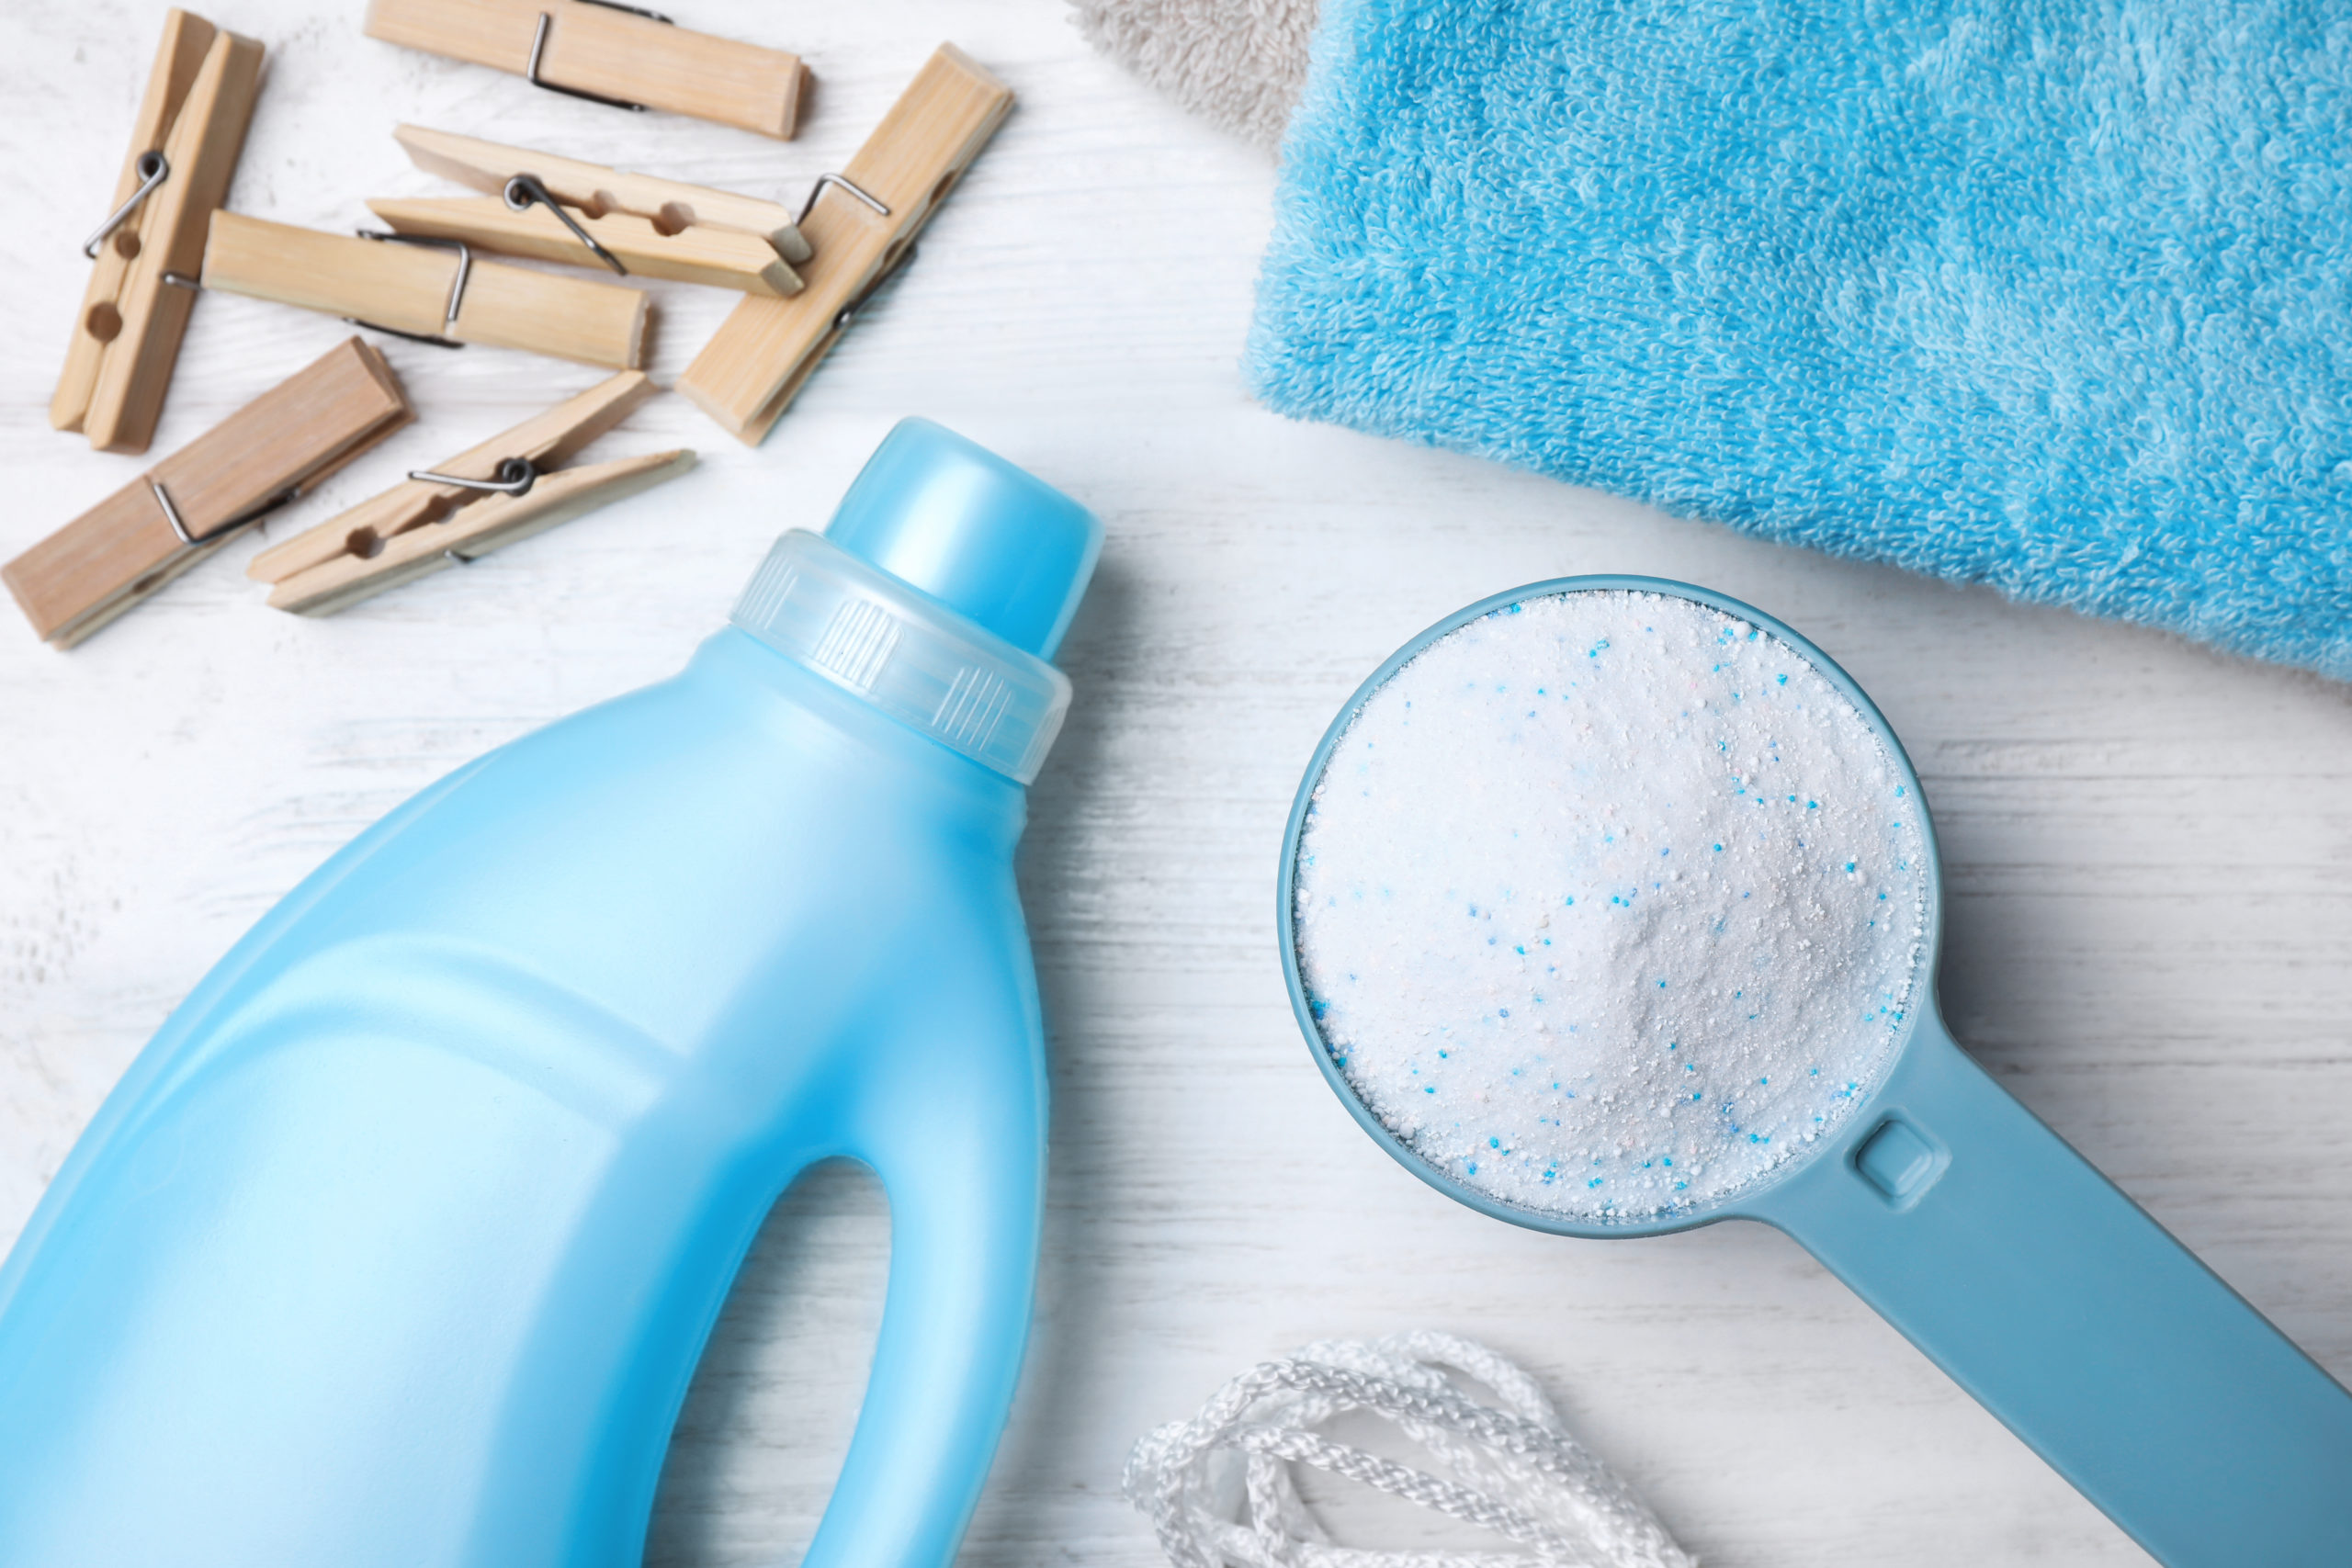 How to Use Laundry Detergent Correctly